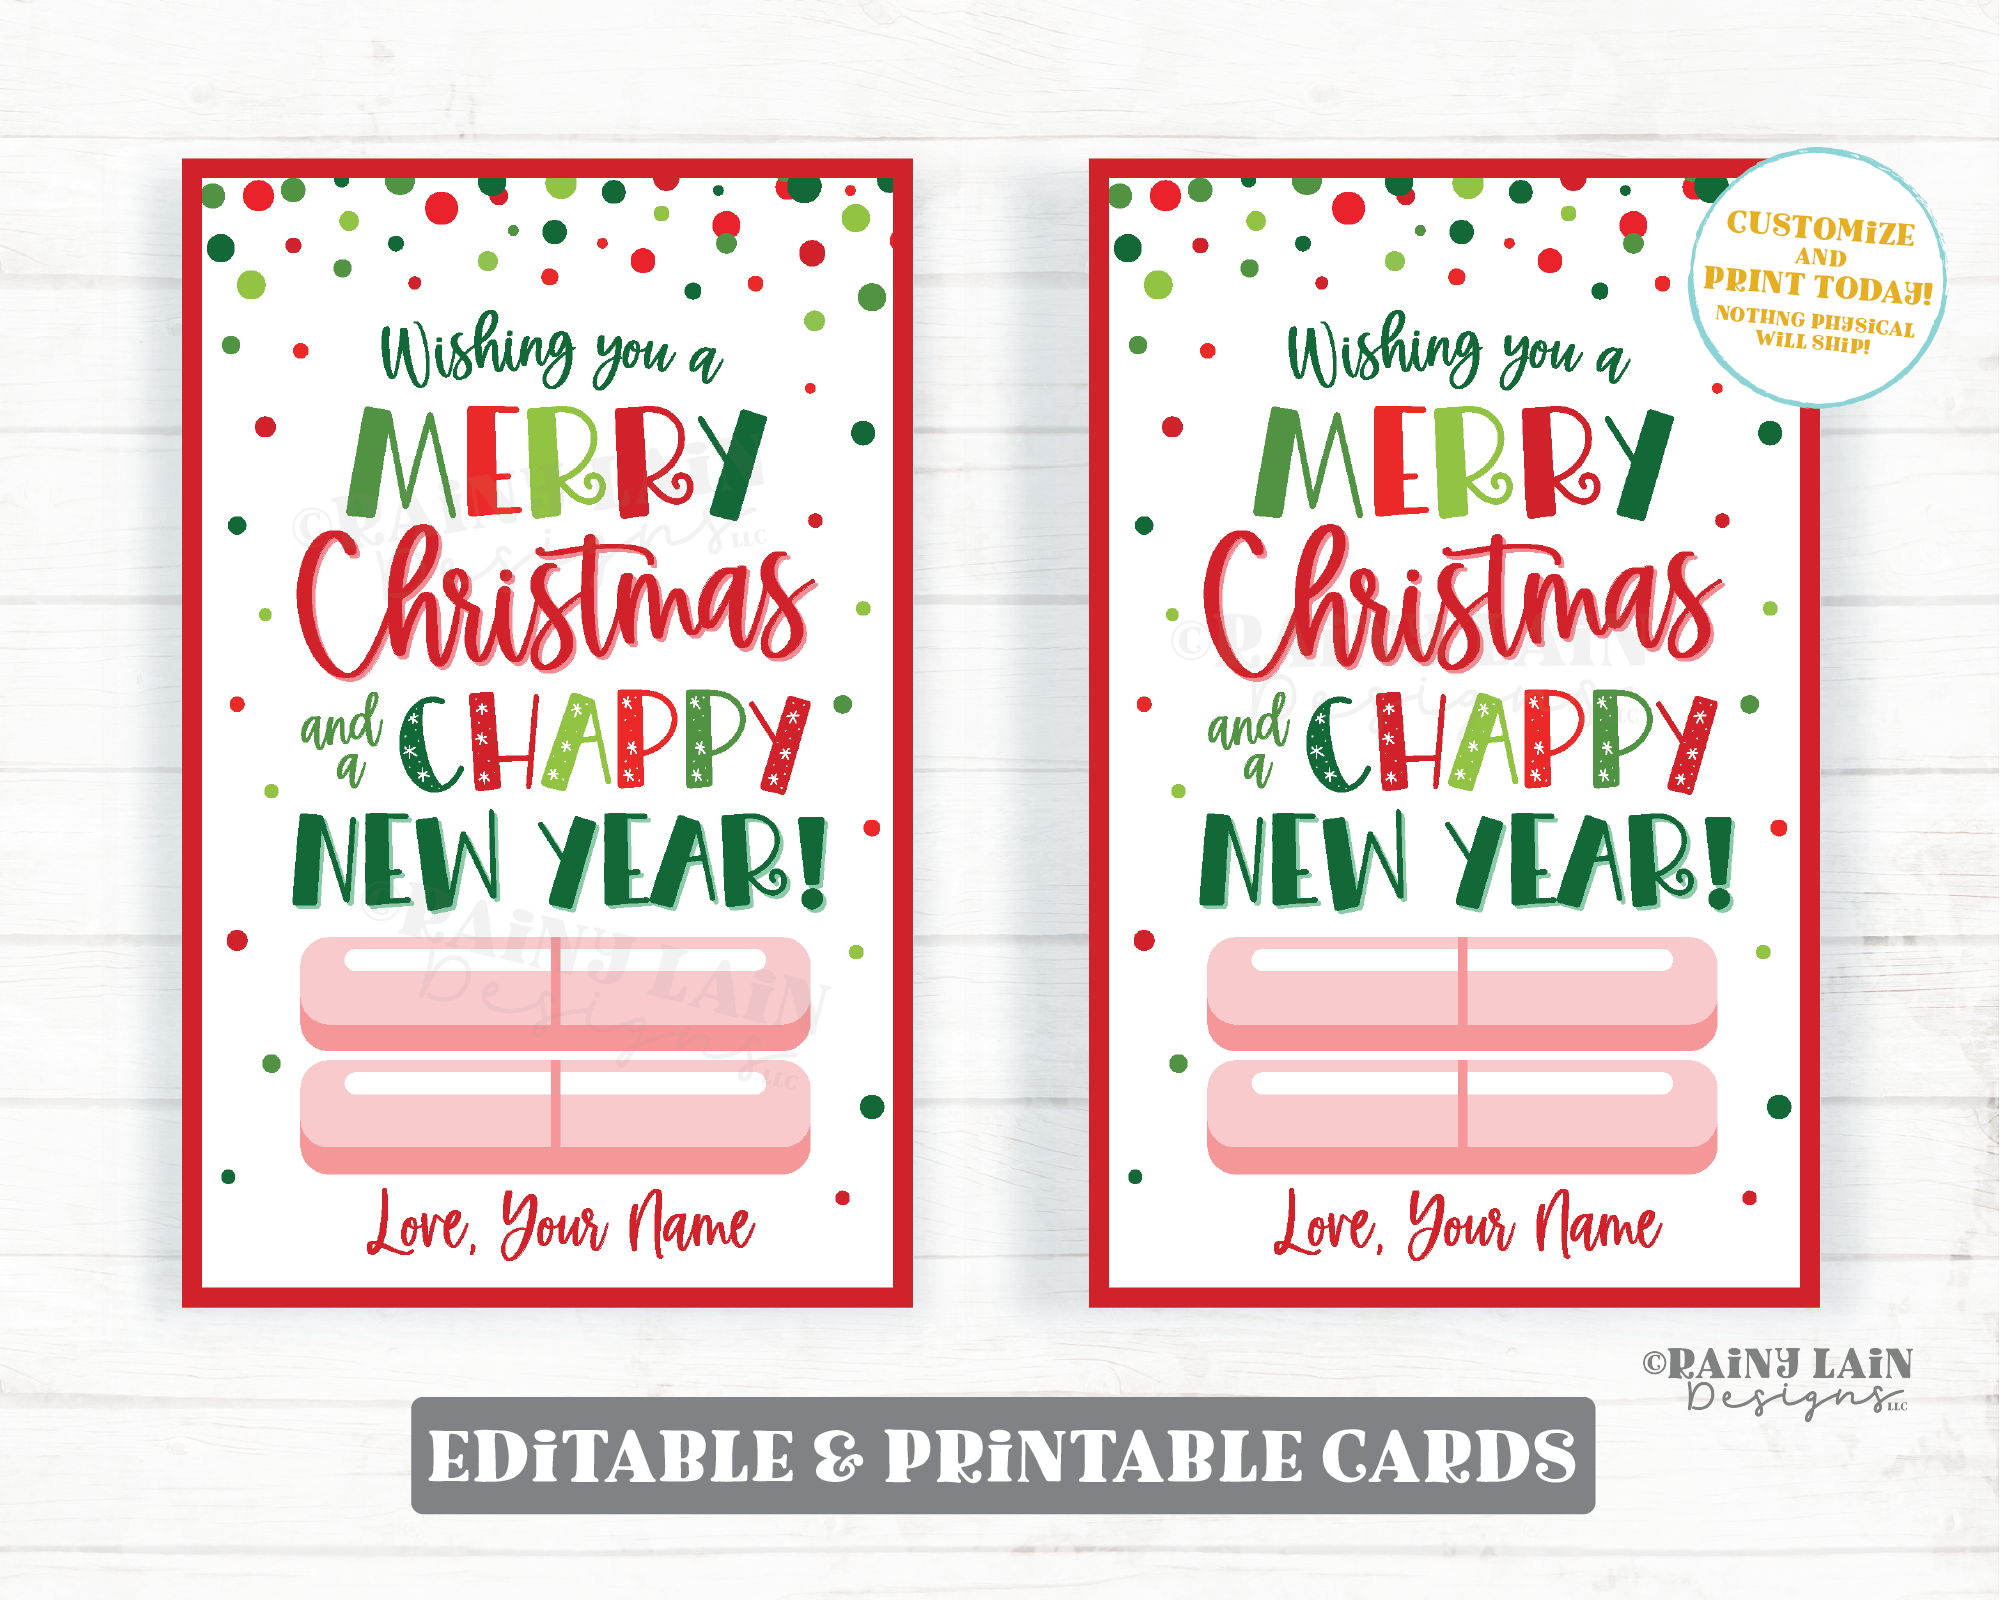 Merry Christmas and Chappy New Year Card Holiday Chapstick Christmas Lip Balm Gift Tag Employee Appreciation Teacher Classroom Company Staff